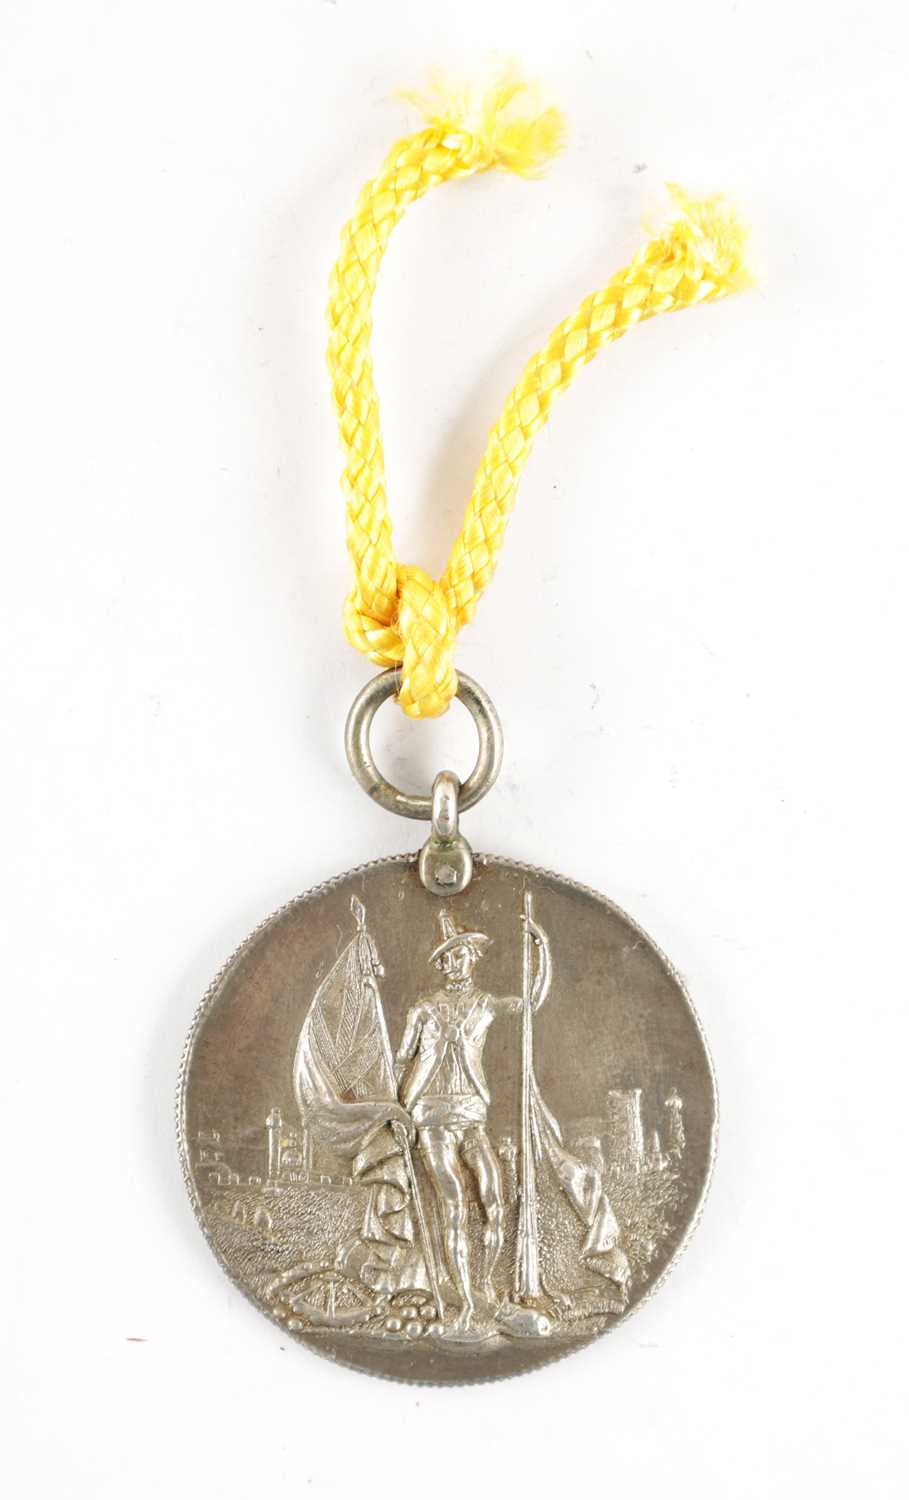 AN HONOURABLE EAST COMPANY SILVER MEDAL FOR MYSORE 1790-92